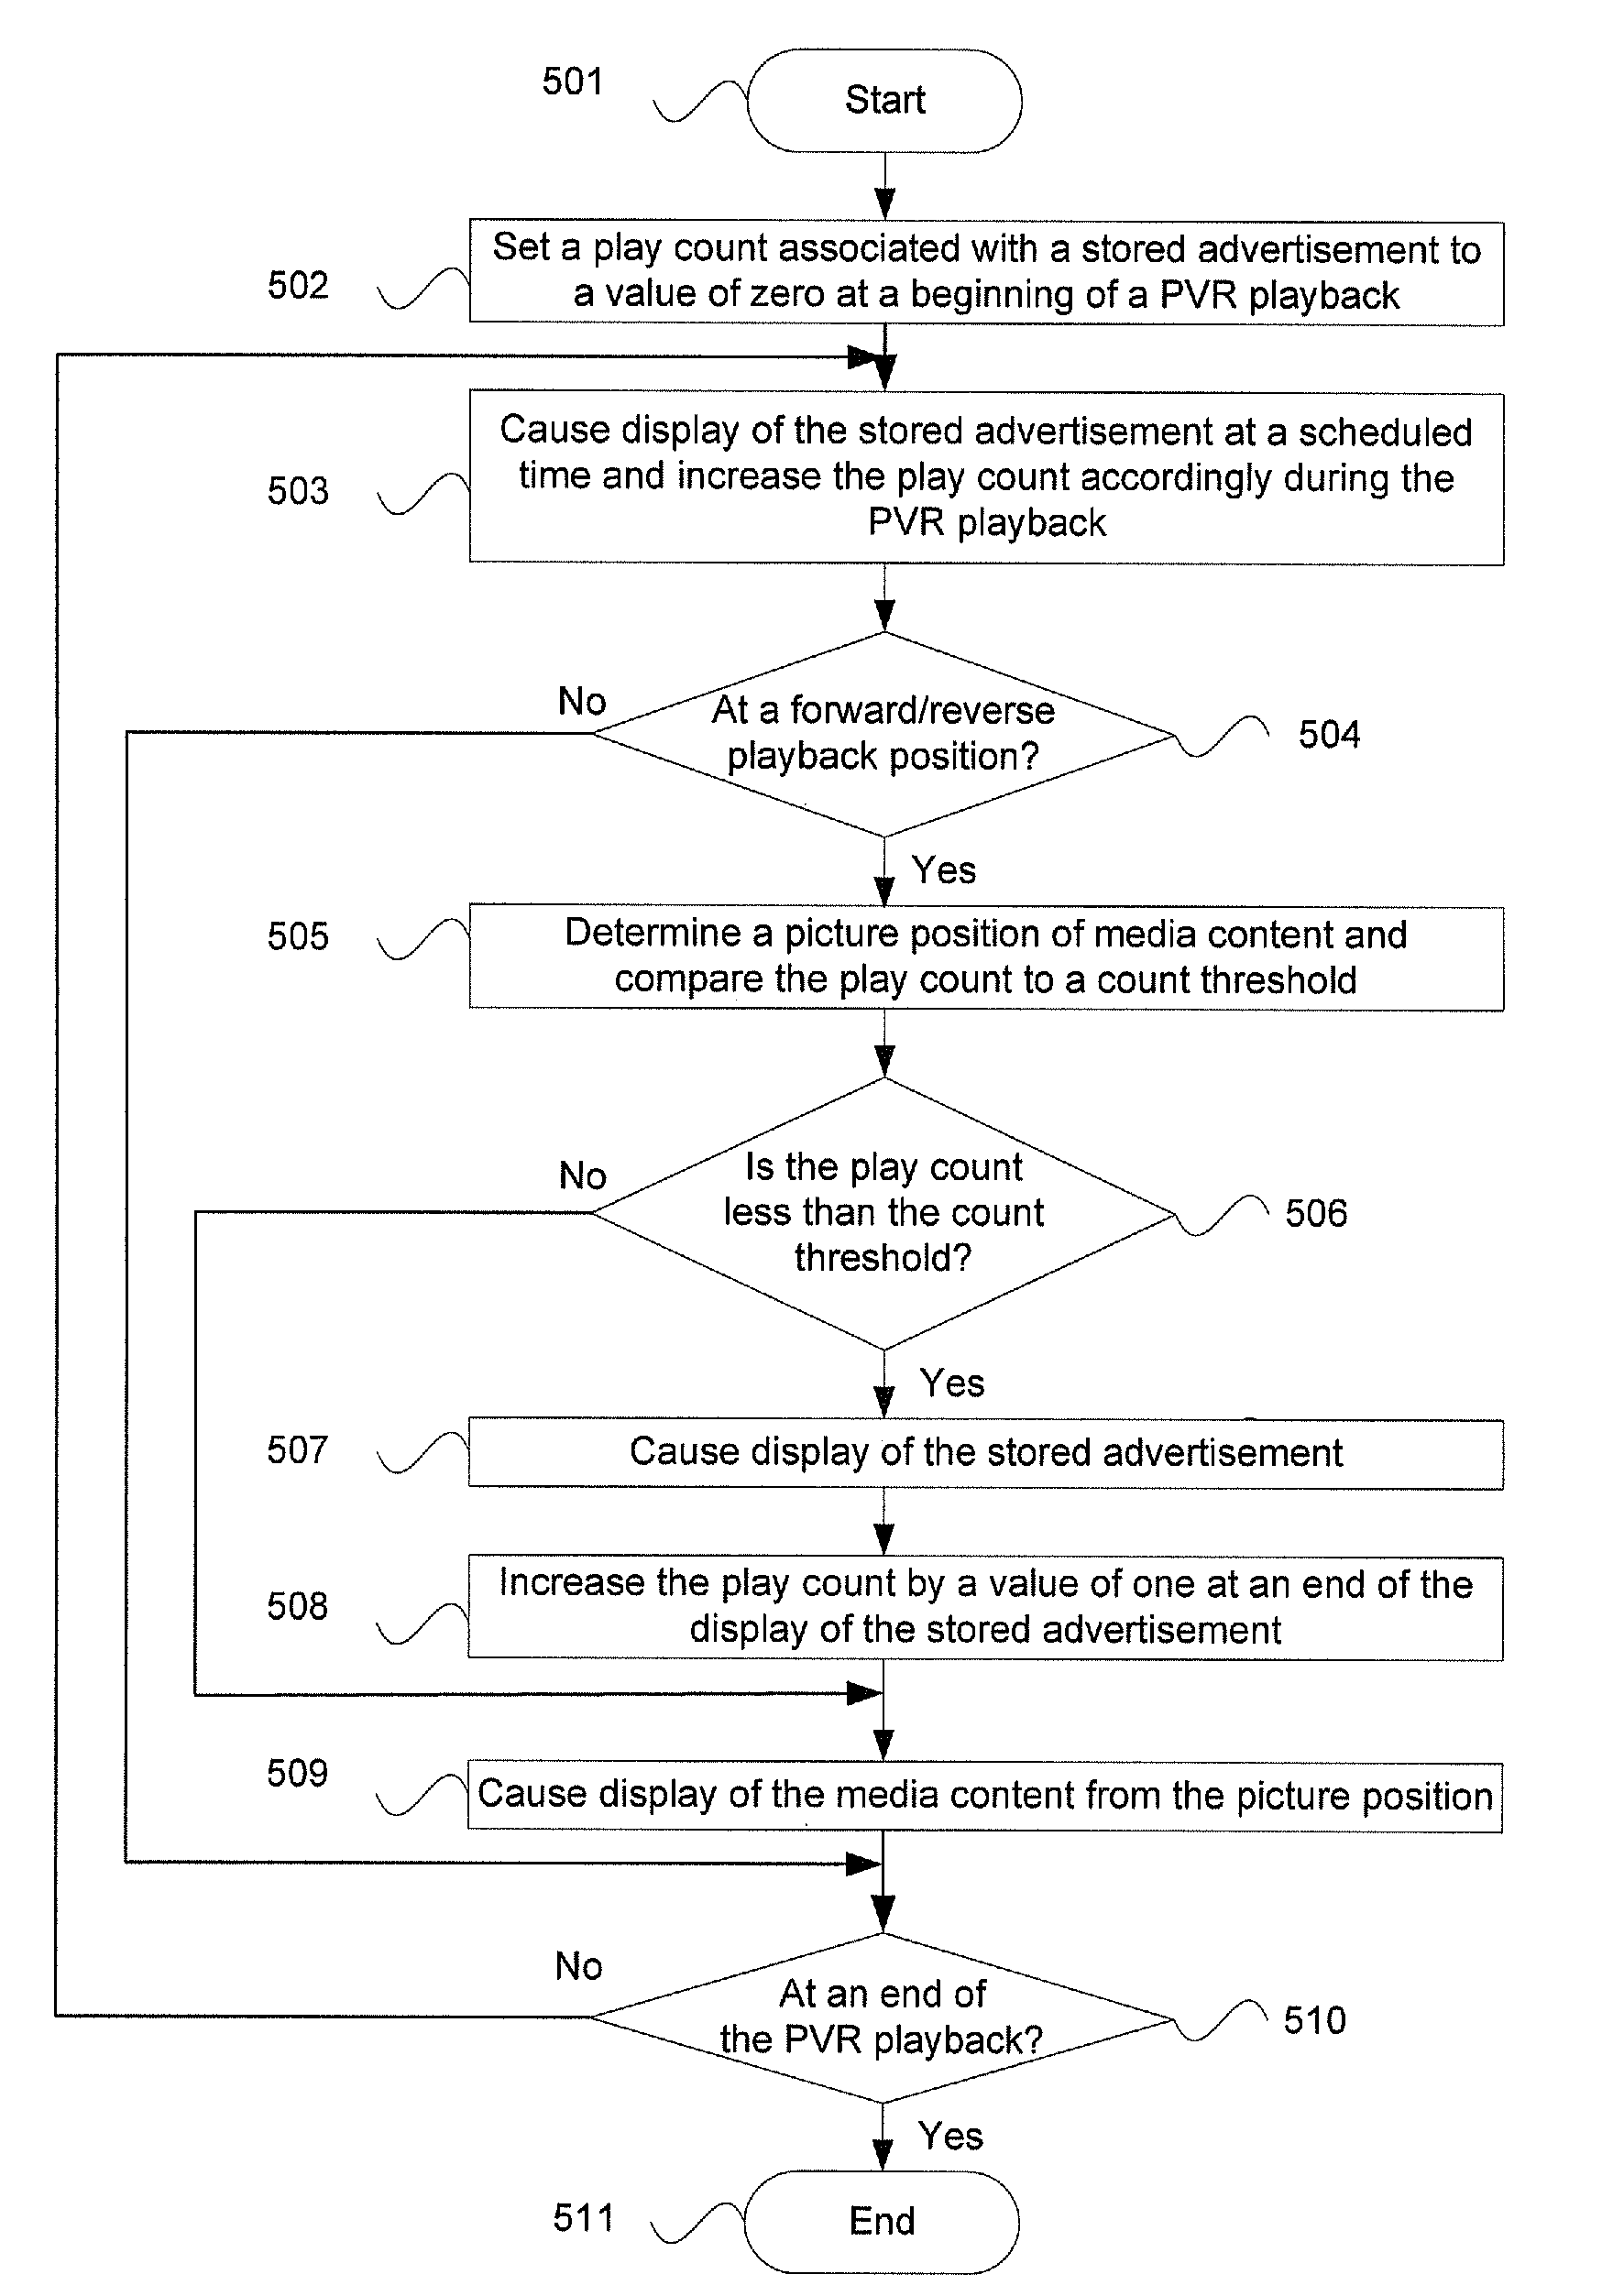 Method and system for advertisement insertion and playback for stb with pvr functionality